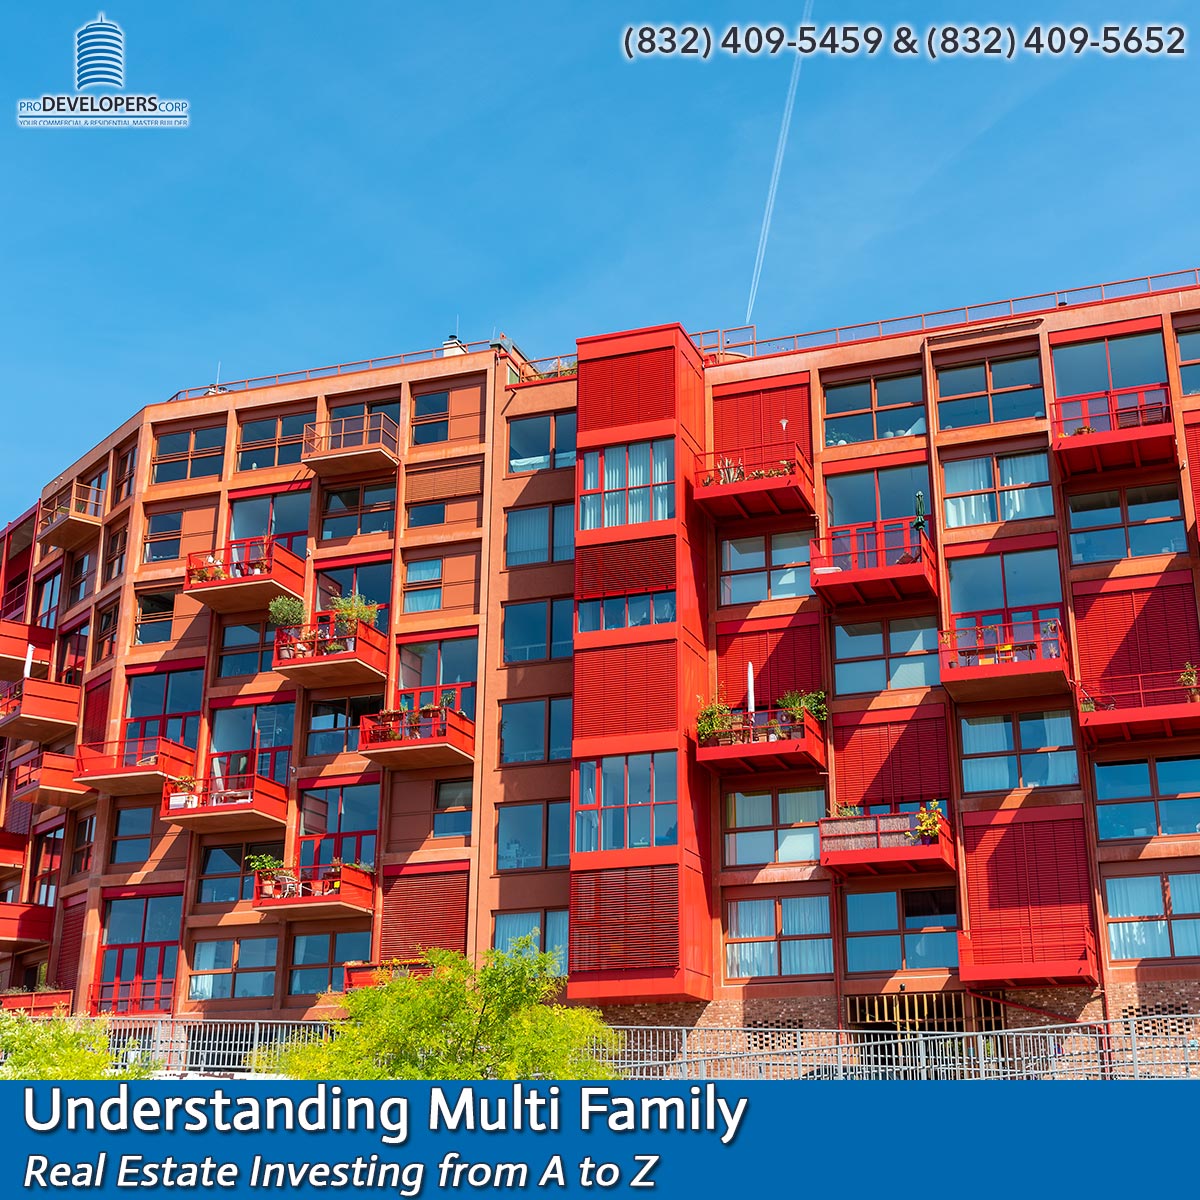 19 Multi family Real Estate Investments in Houston